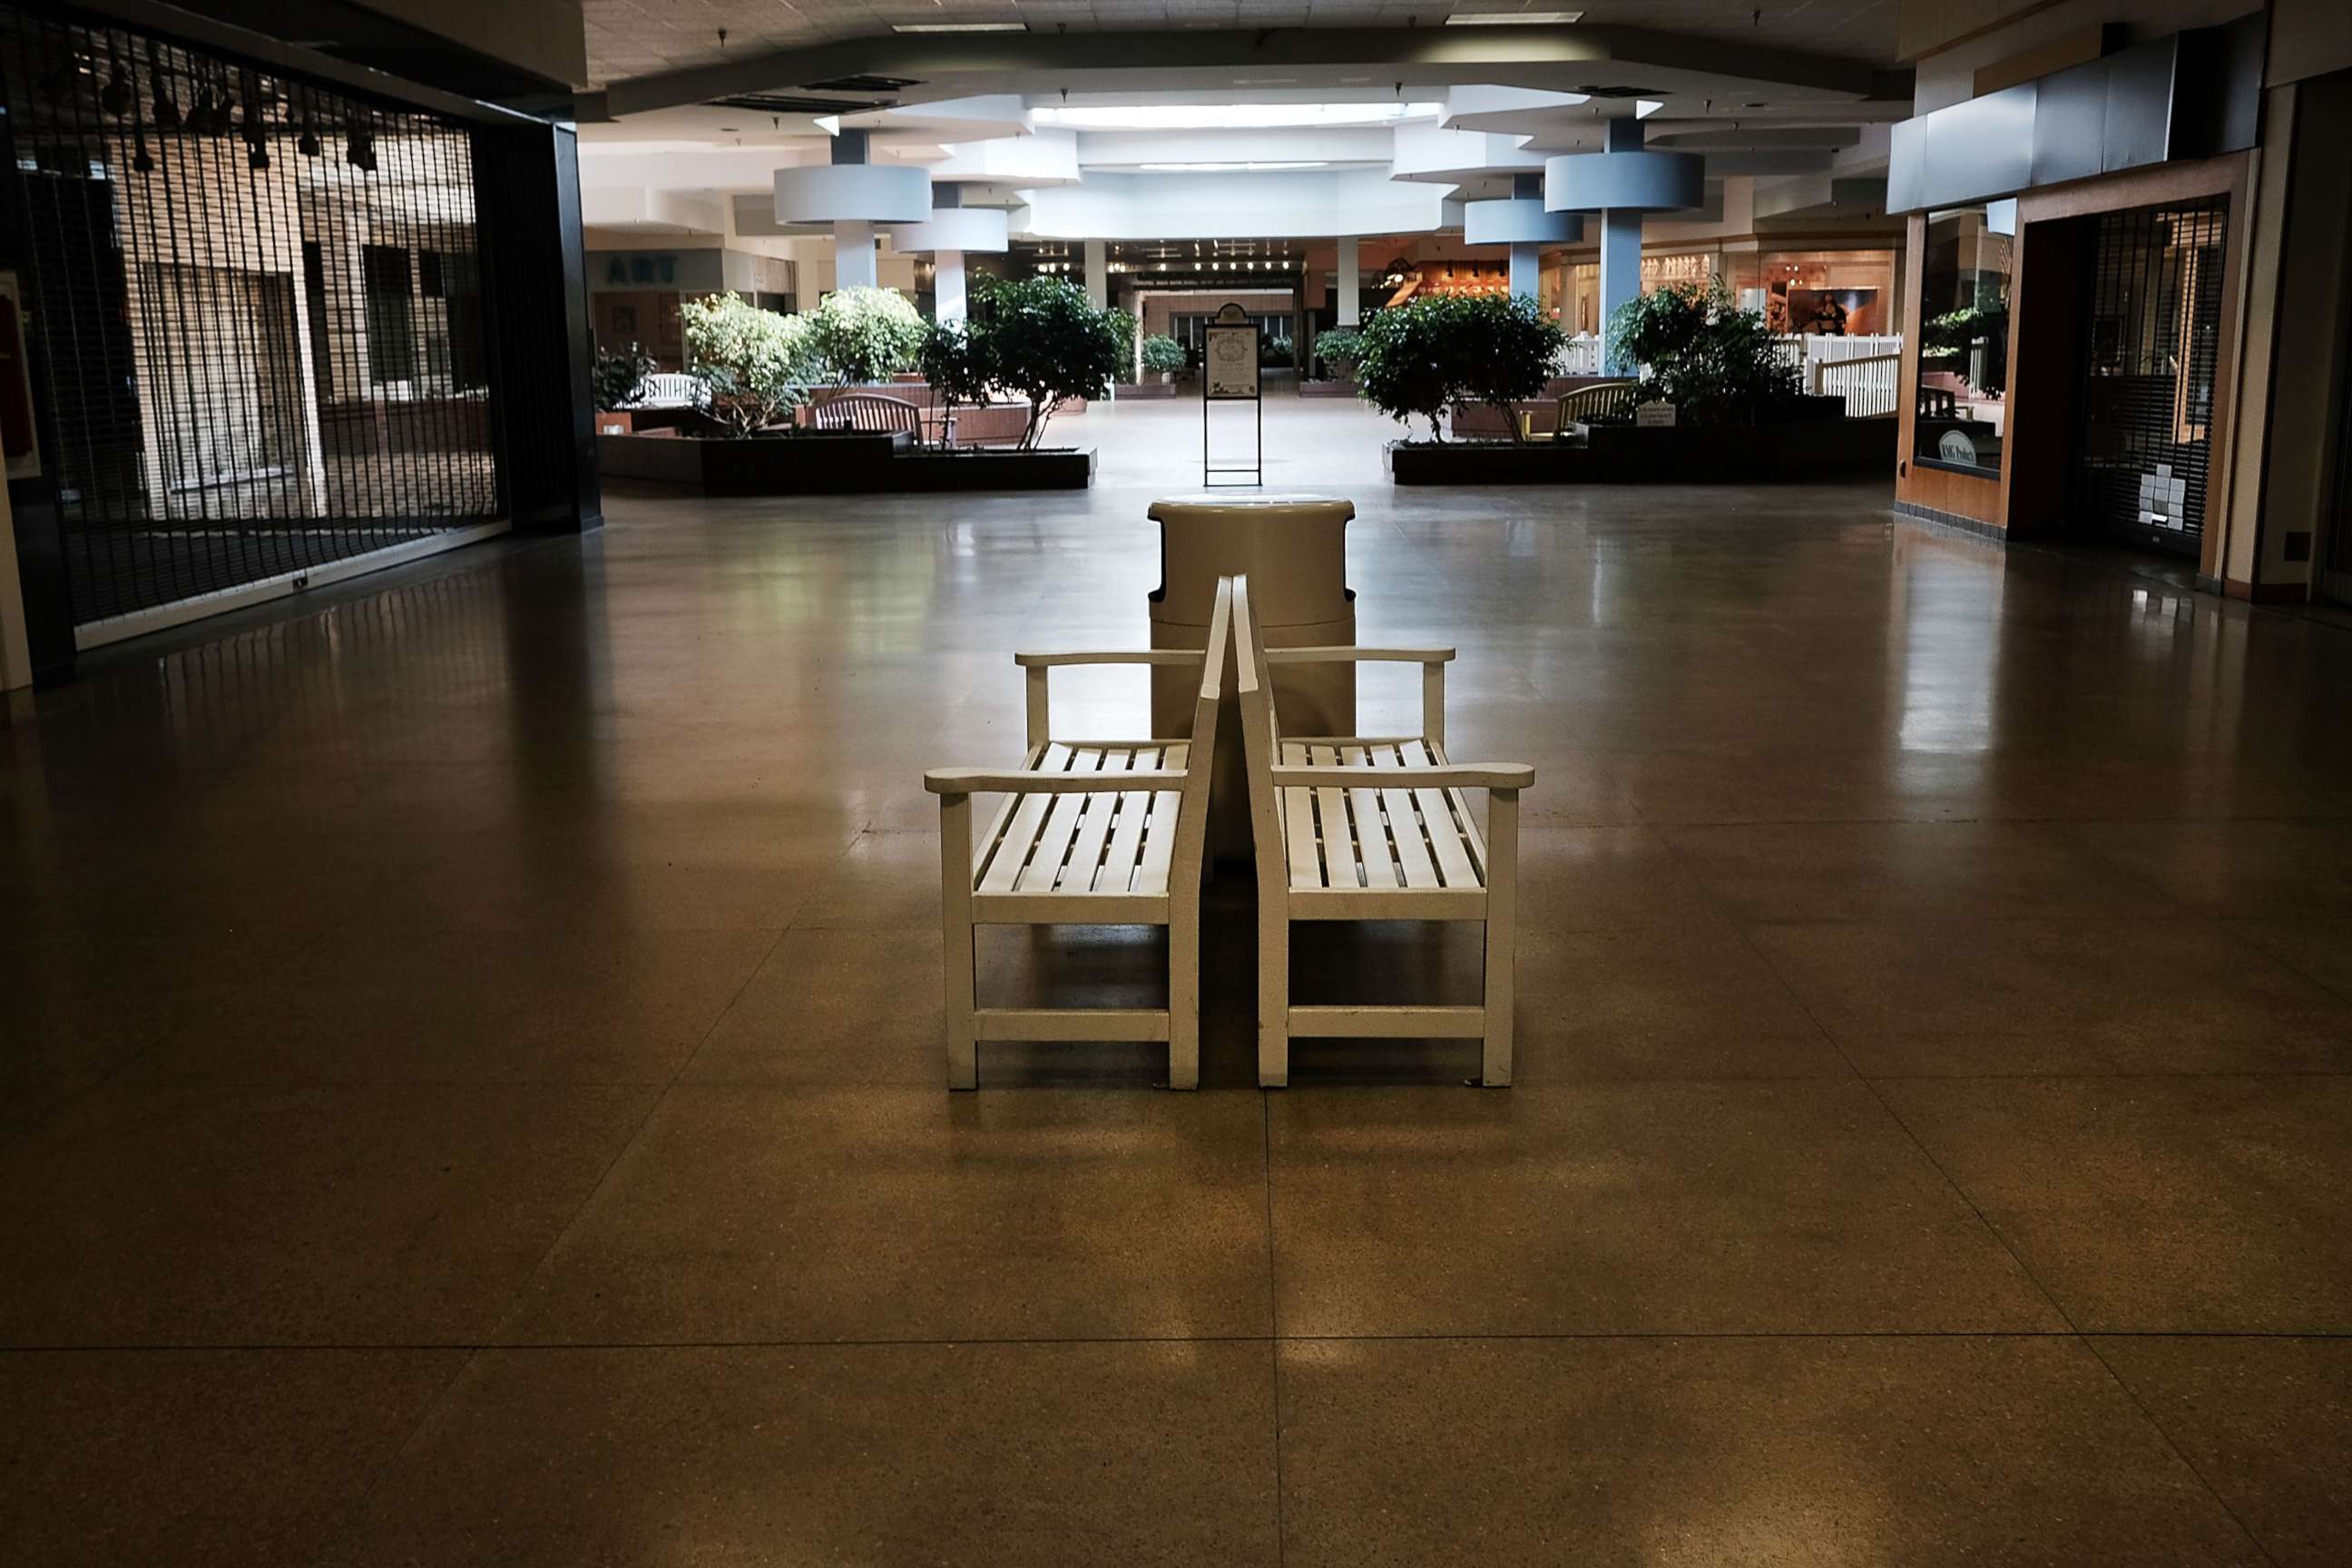 PHOTO: Shuttered stores dominate the interior of the Schuylkill Mall on May 17, 2017, shortly before its closing in Frackville, Pa.